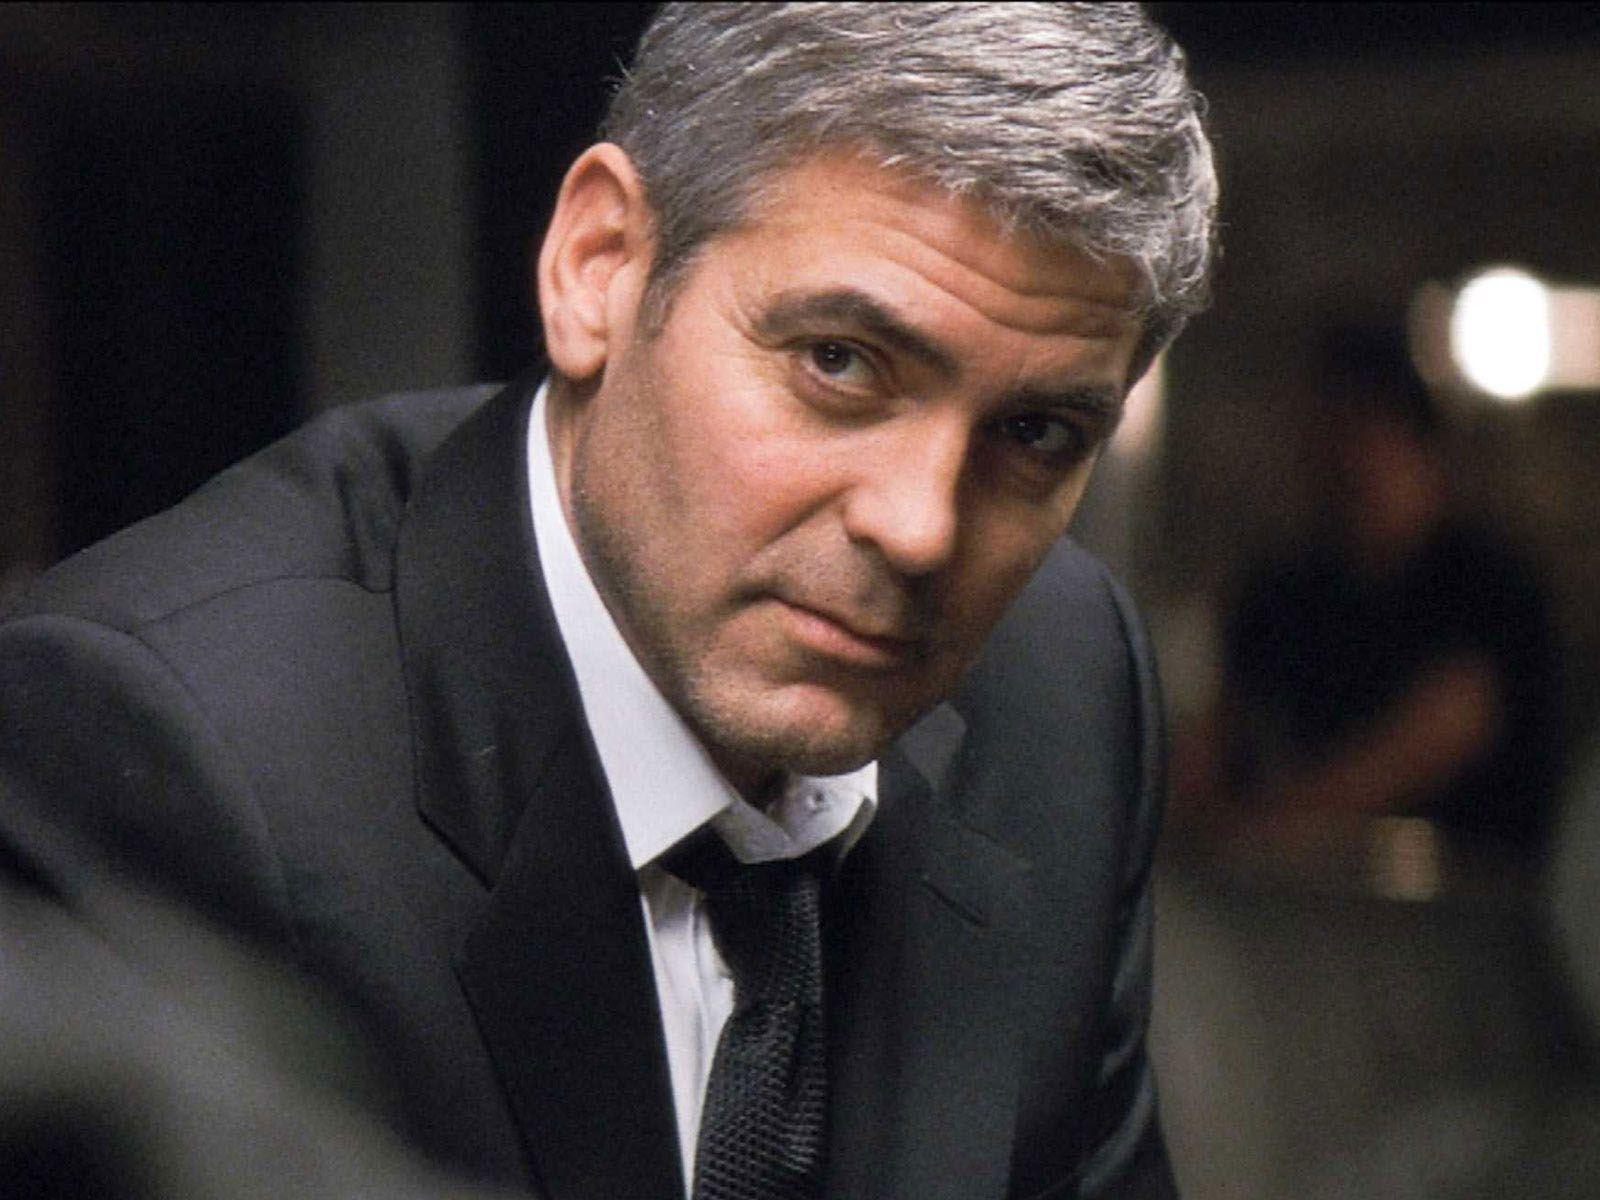 Georges Clooney in suit on WallpaperMade